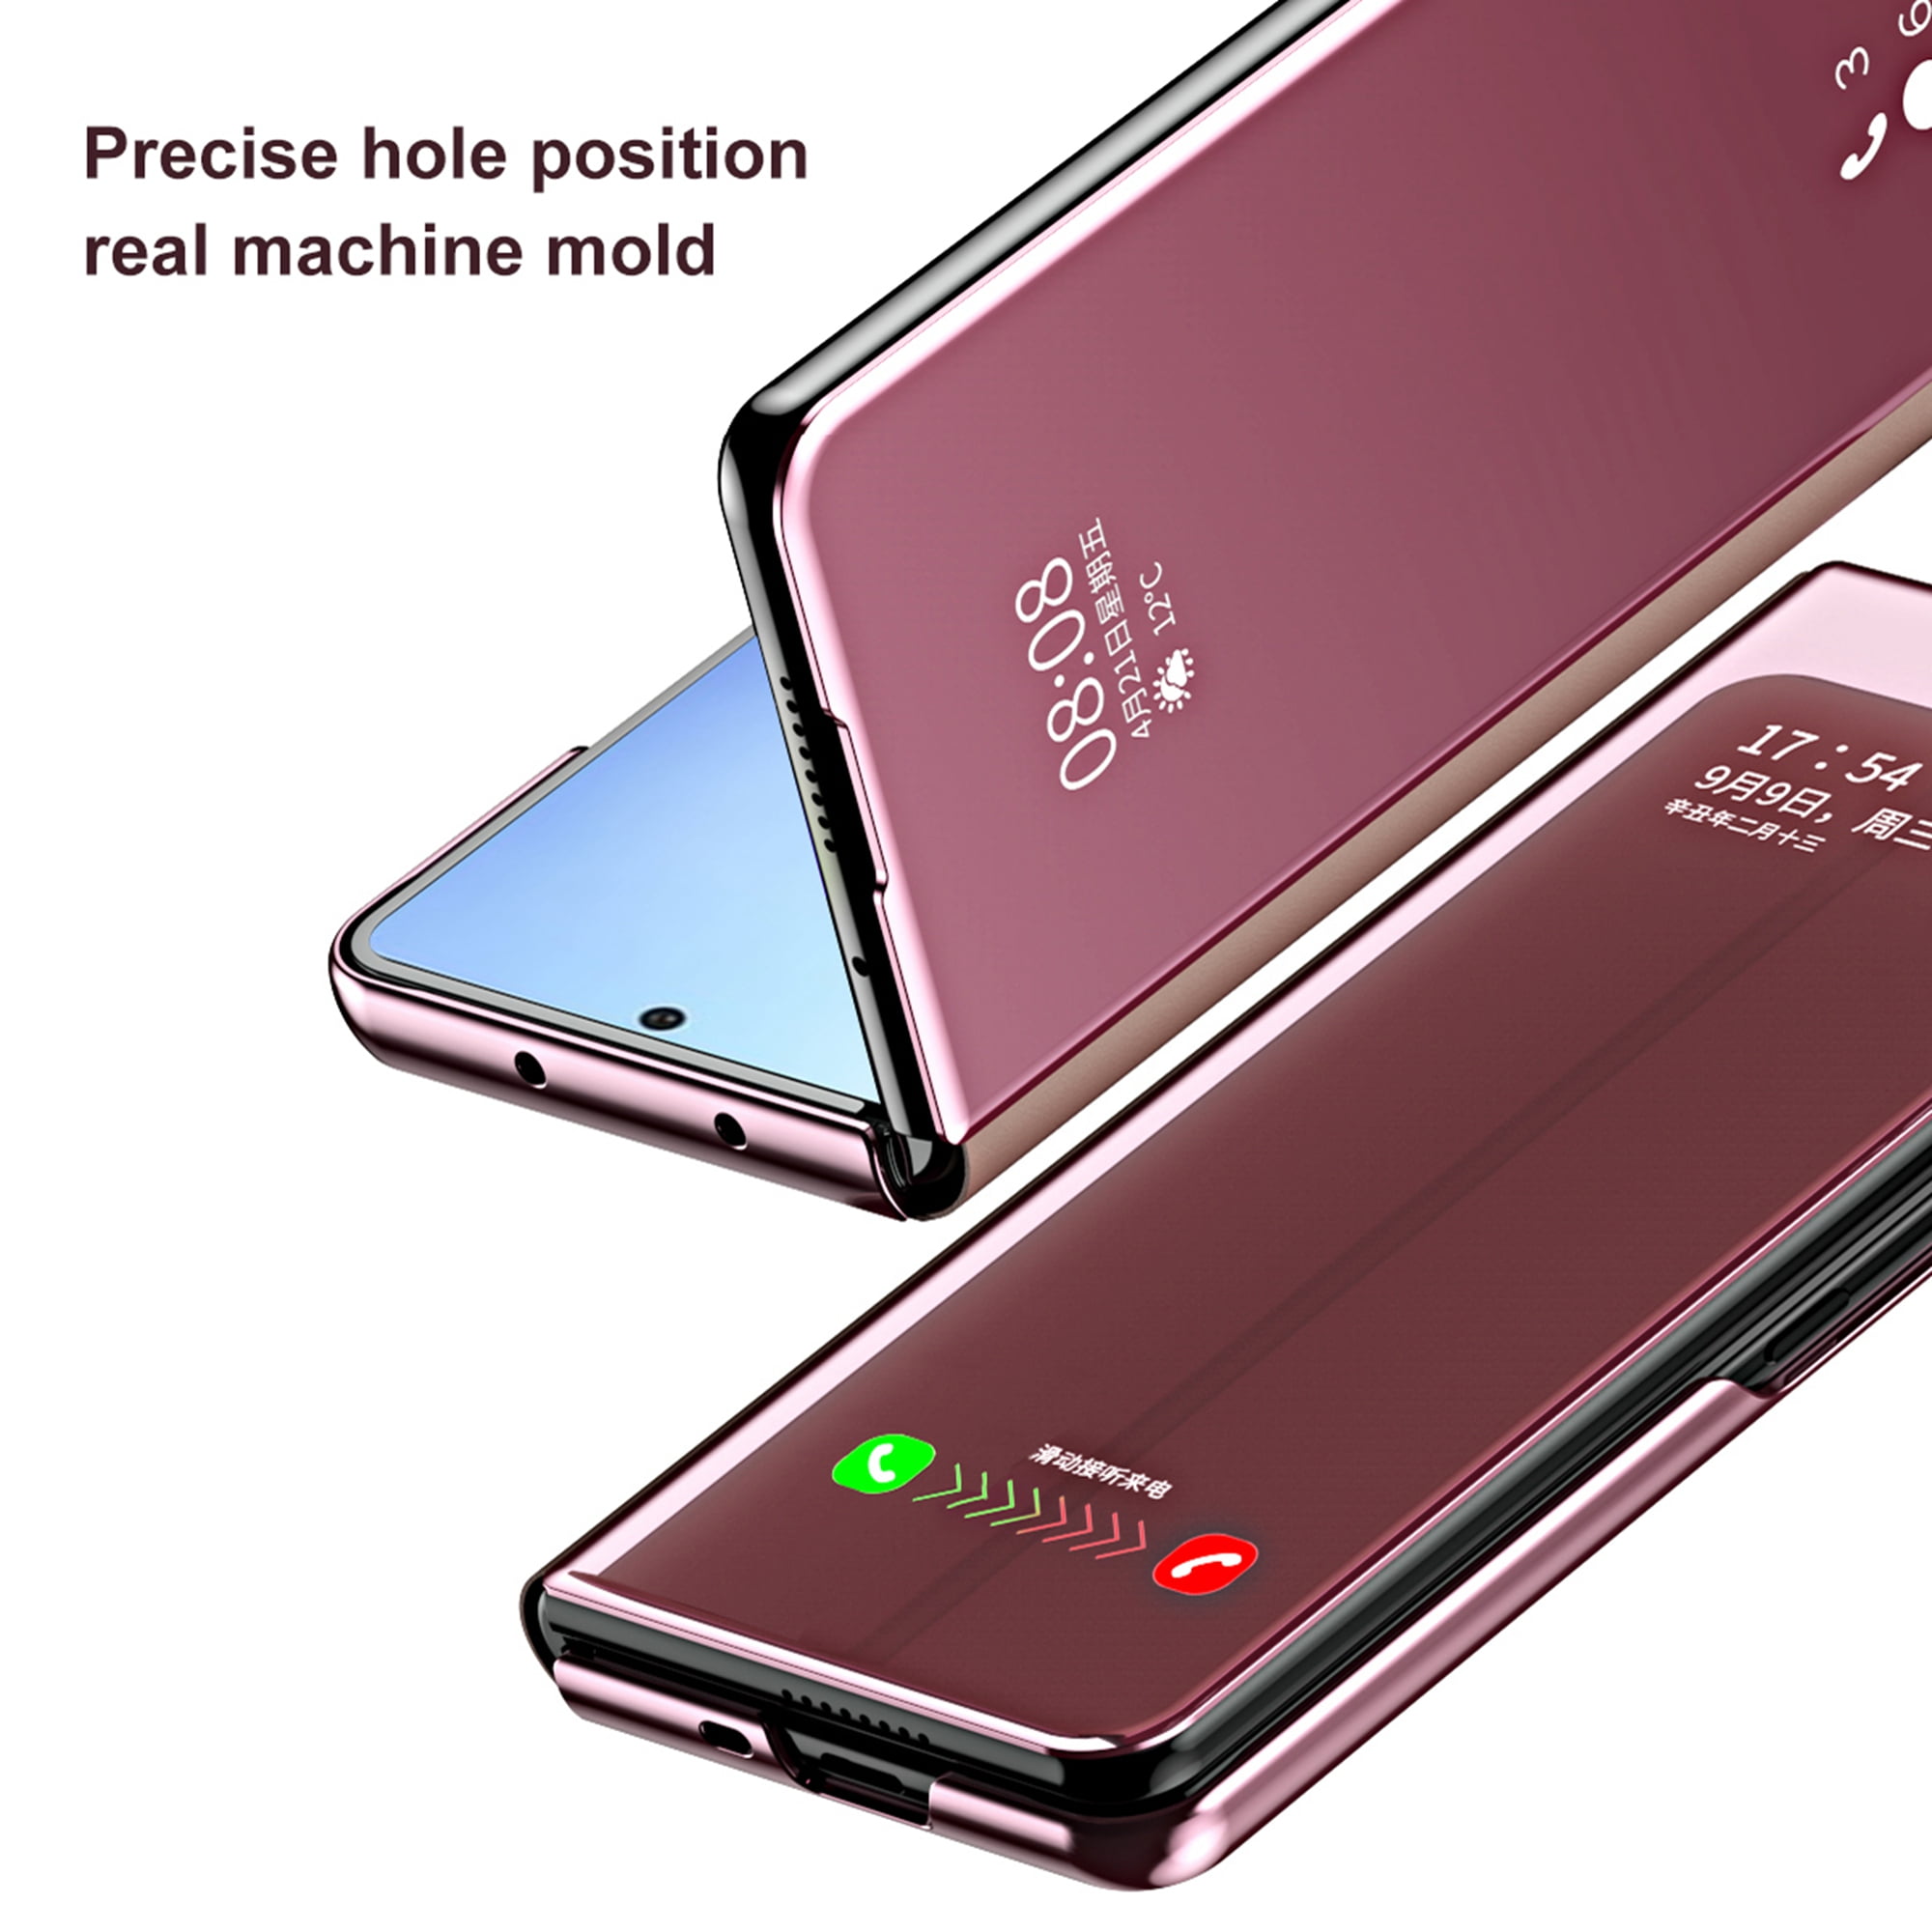 Jioeuinly Galaxy Z Fold 4 Case Compatible with Samsung Zfold 4 5G Phone Case Cover [Hard PC + Soft Silicone][Colorful Reflect Light] IMDF-JXX